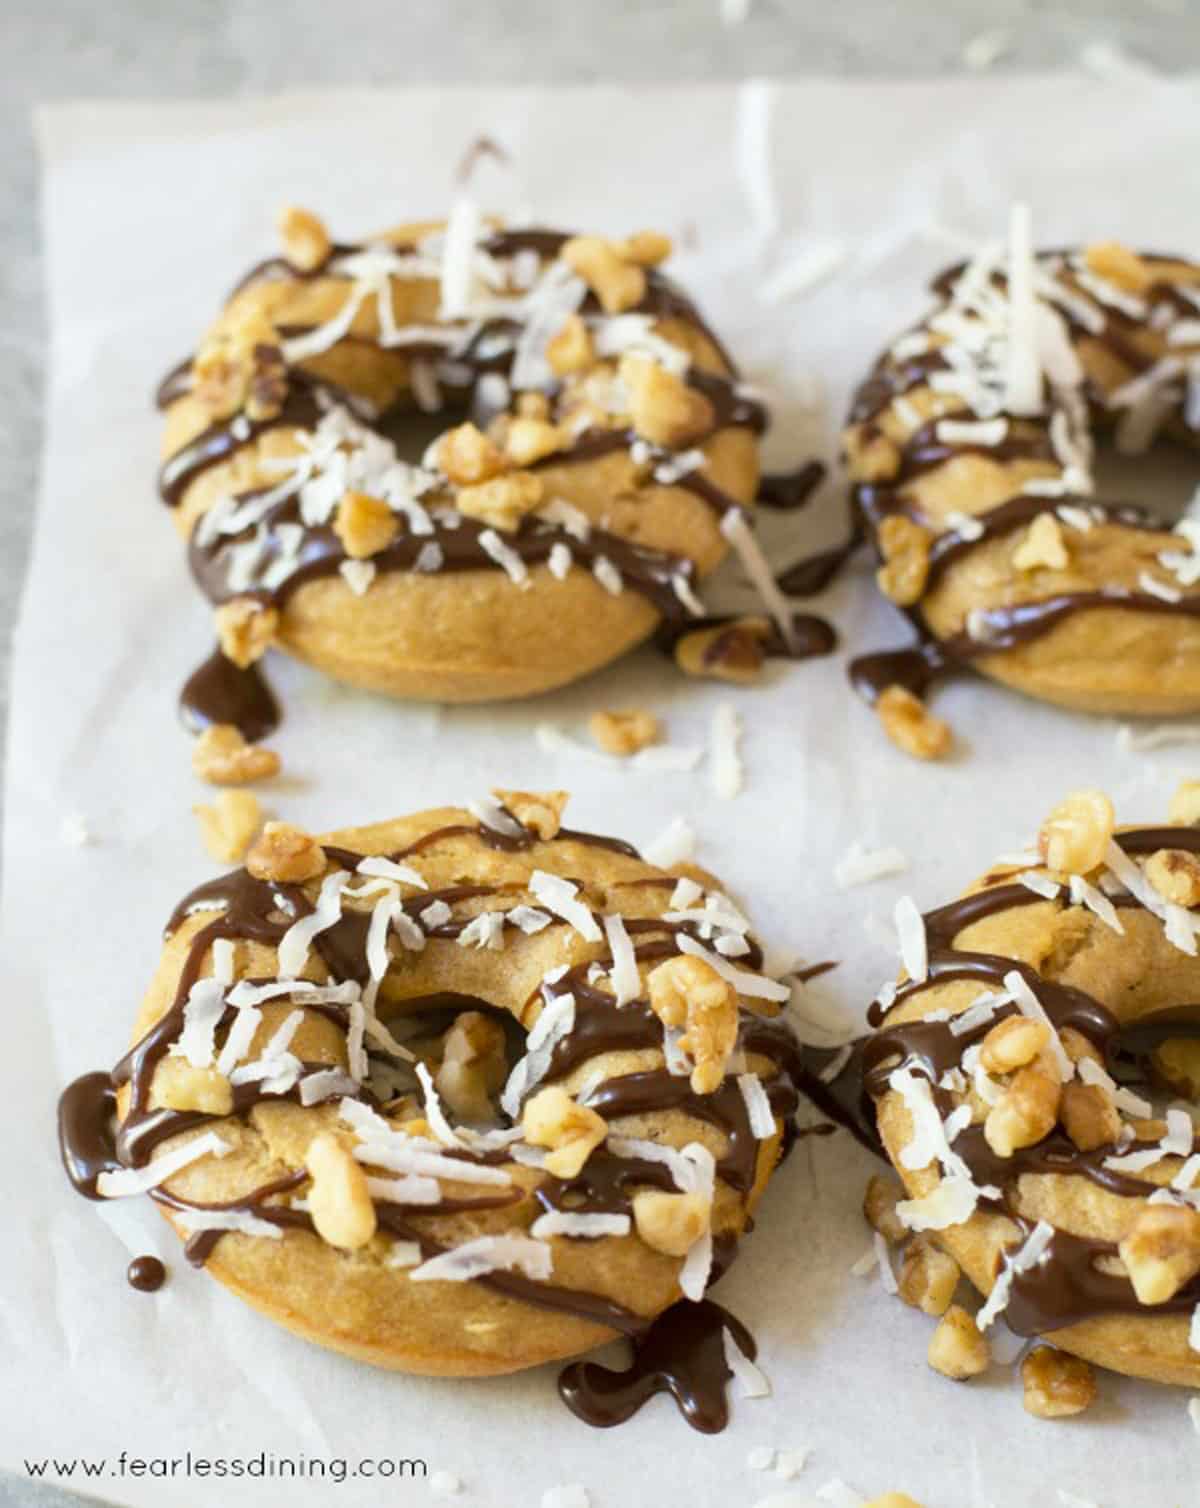 Gluten free banana donuts topped with fudge, coconut, and walnuts.